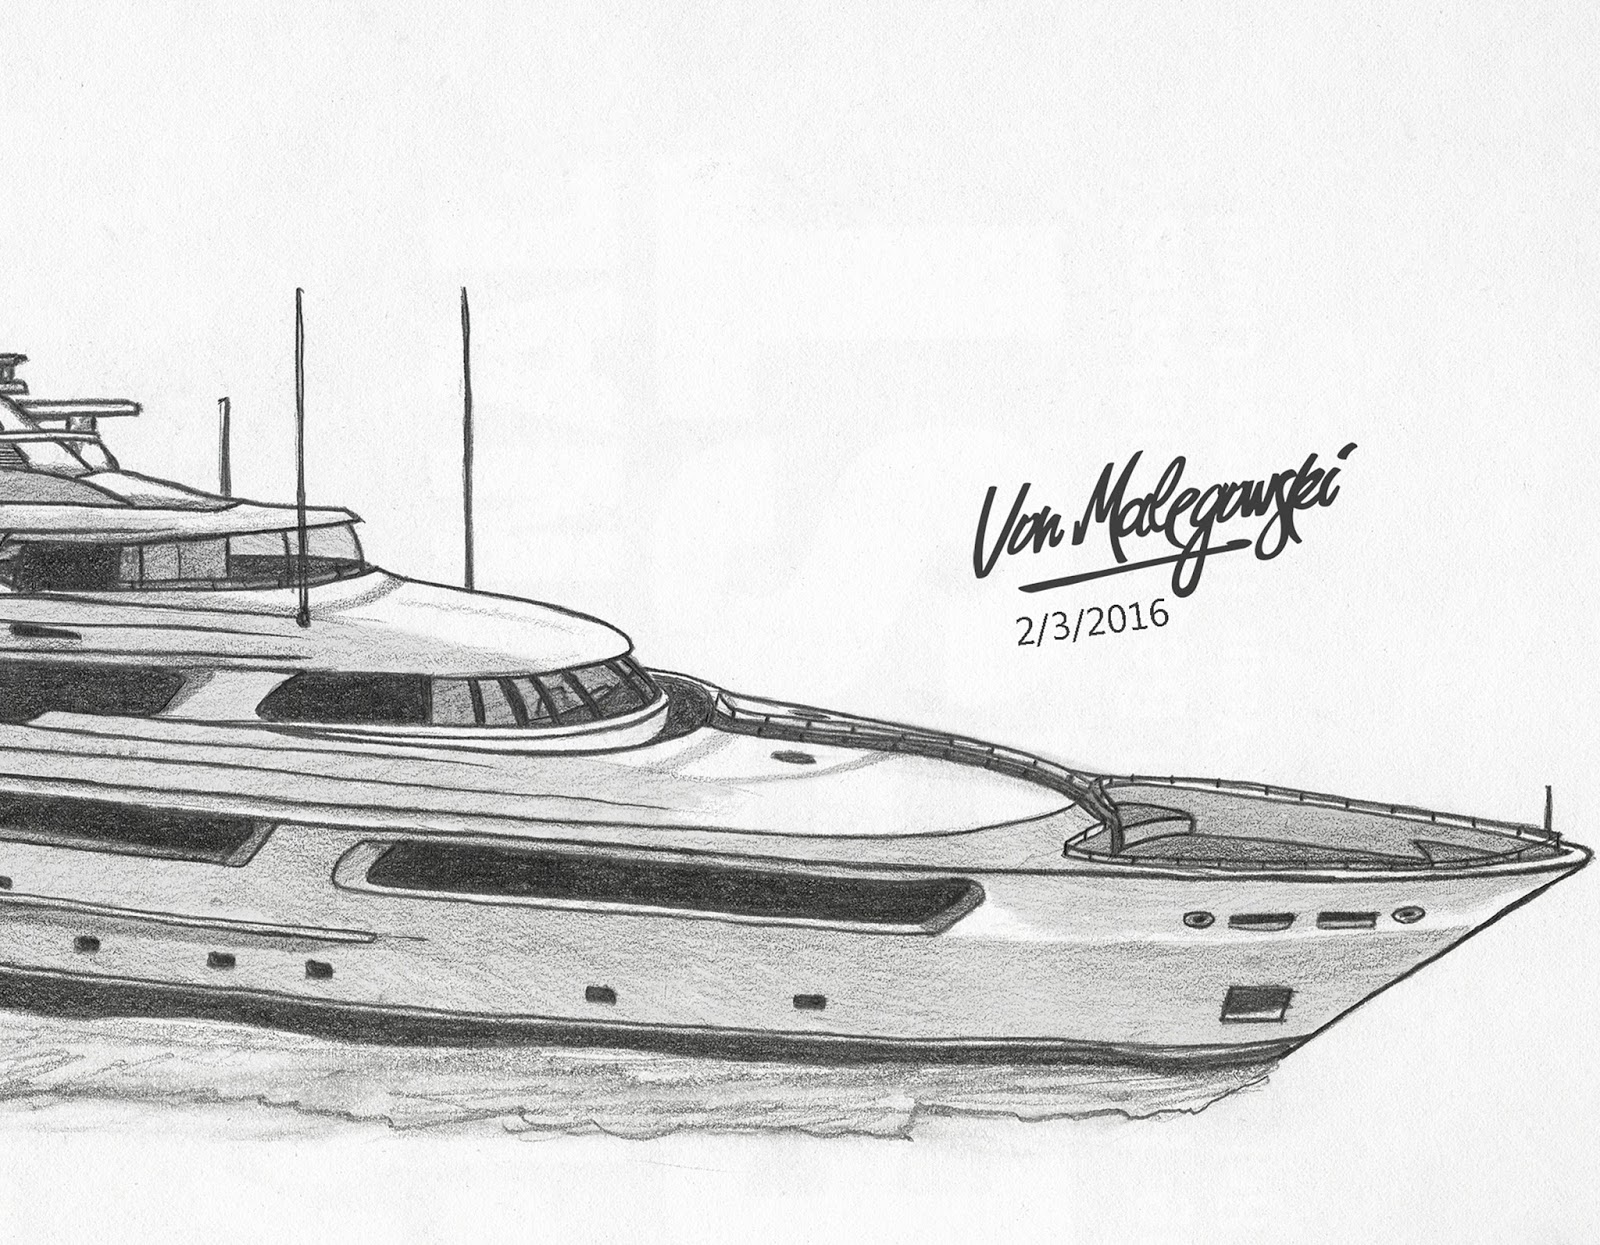 yacht images drawing